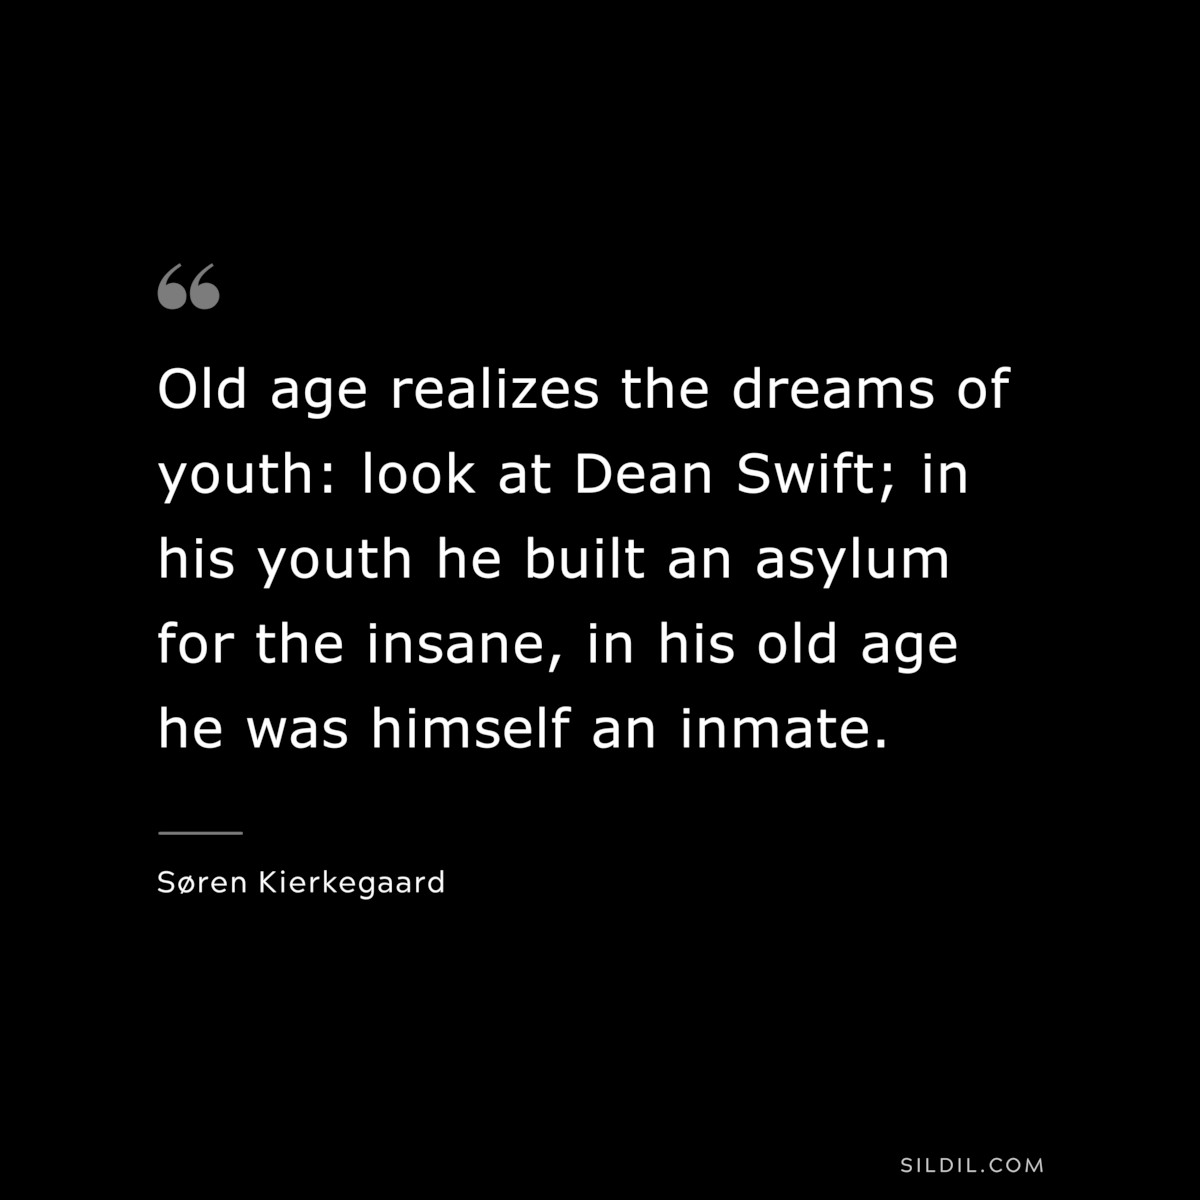 Old age realizes the dreams of youth: look at Dean Swift; in his youth he built an asylum for the insane, in his old age he was himself an inmate. ― Søren Kierkegaard